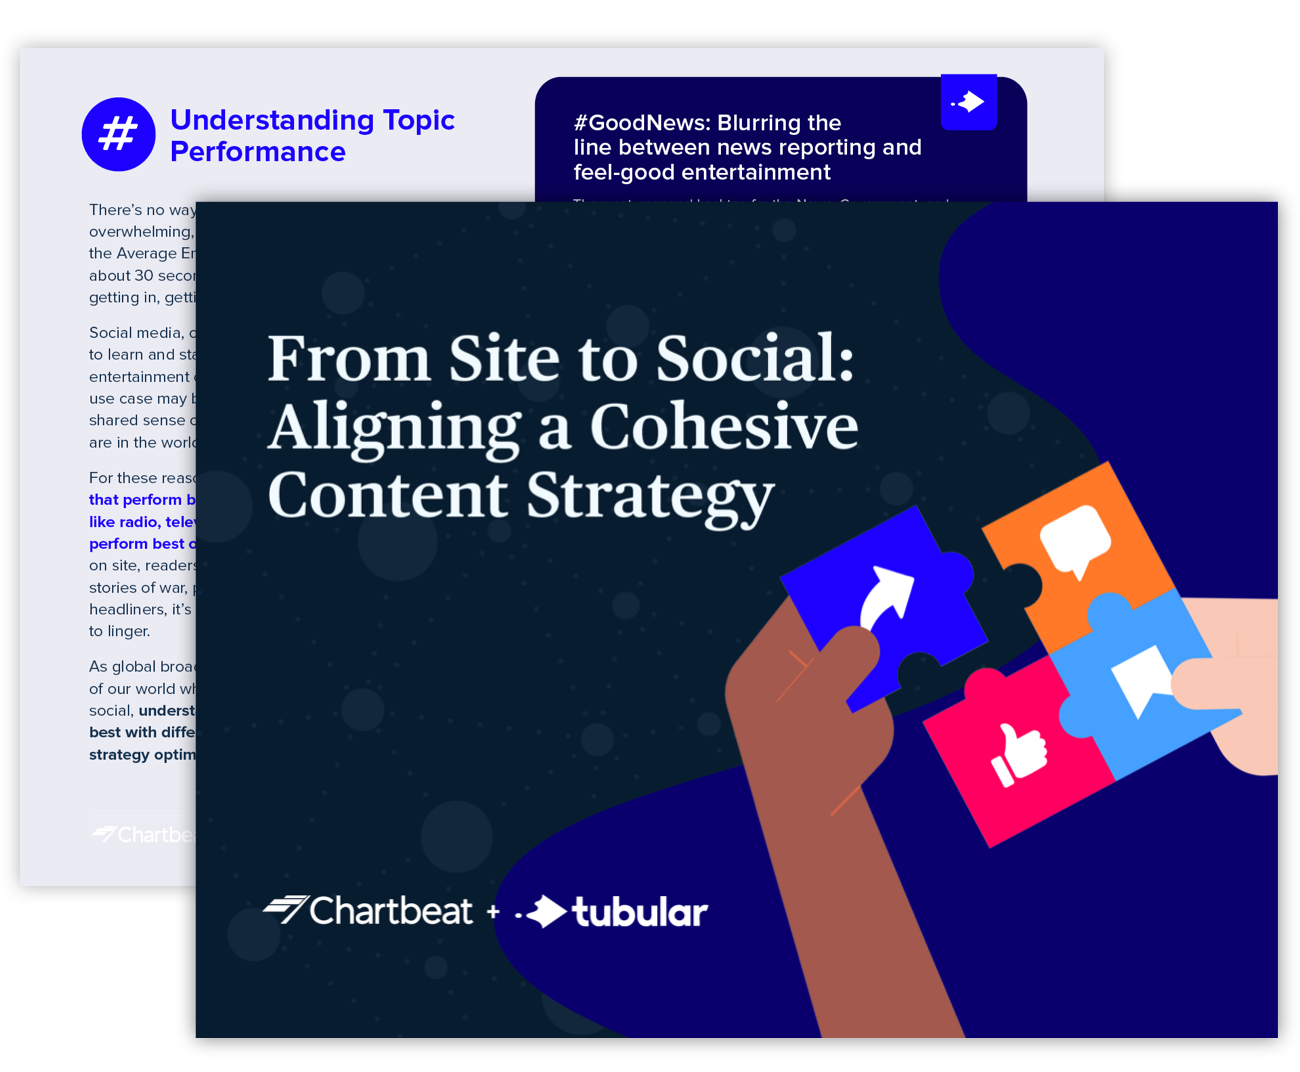 From Site to Social: Aligning a Cohesive Content Strategy